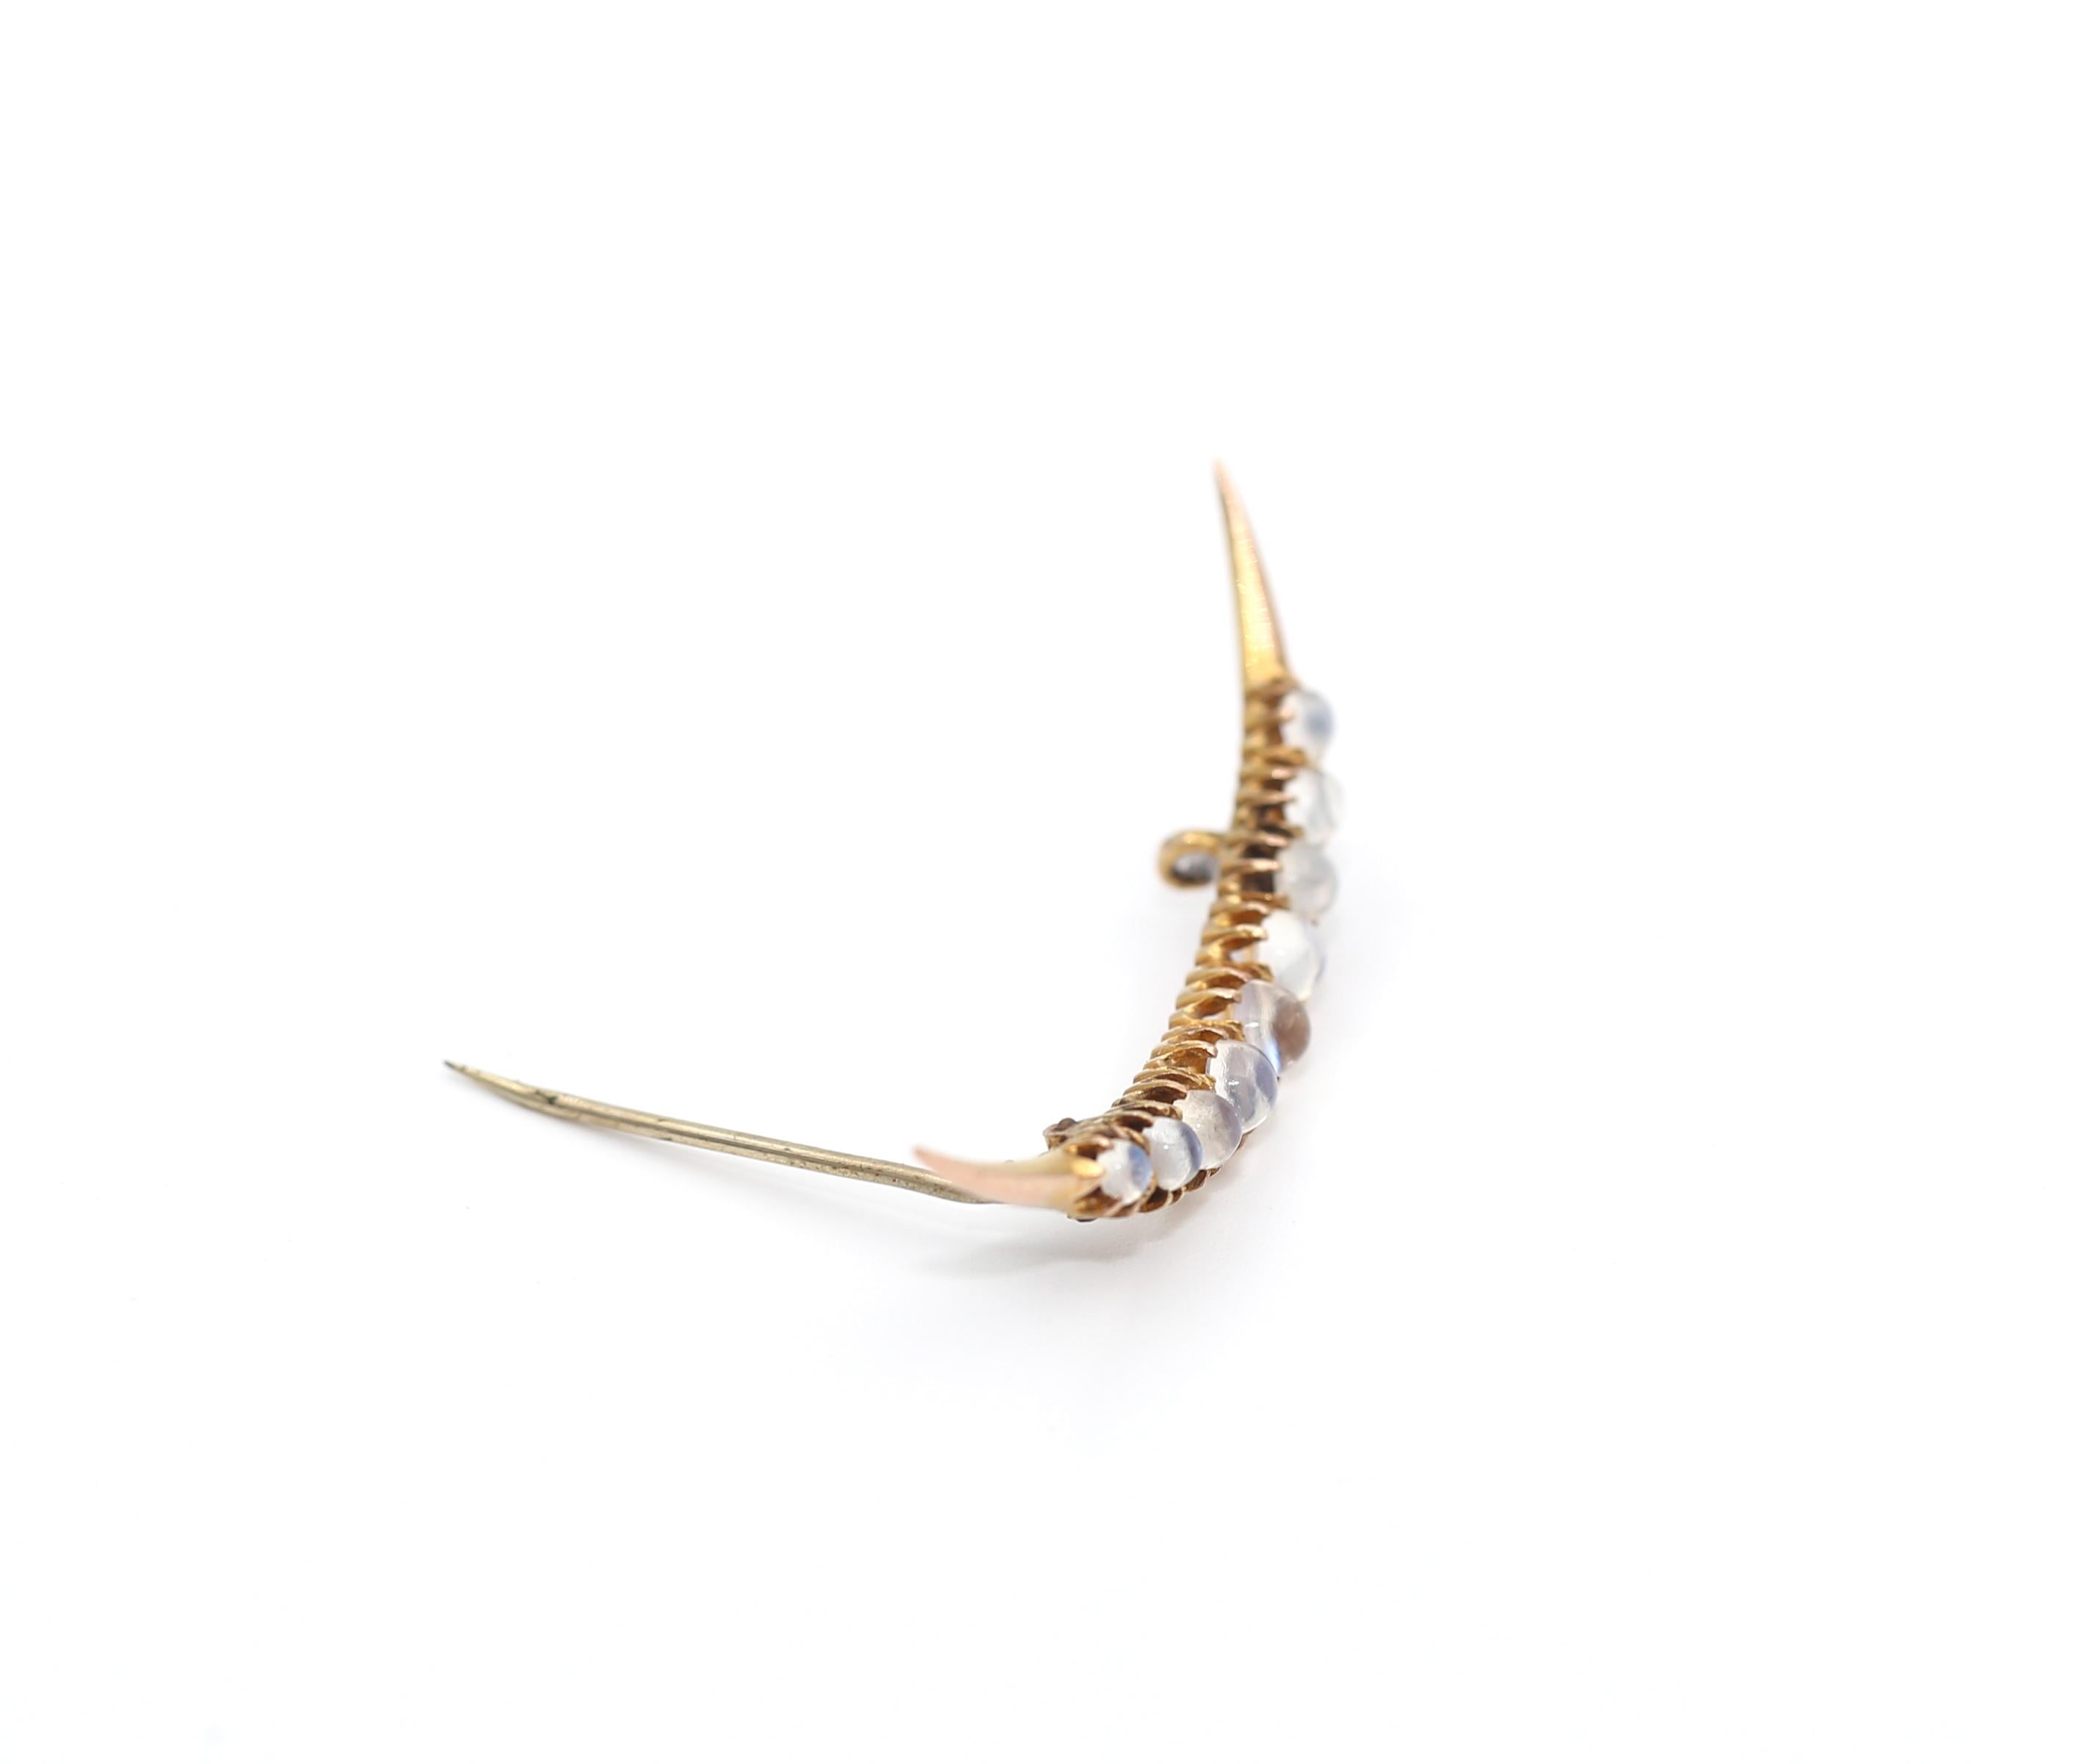 Moonstone Crescent Moon Brooch Yellow Gold, 1900 In Good Condition For Sale In Herzelia, Tel Aviv